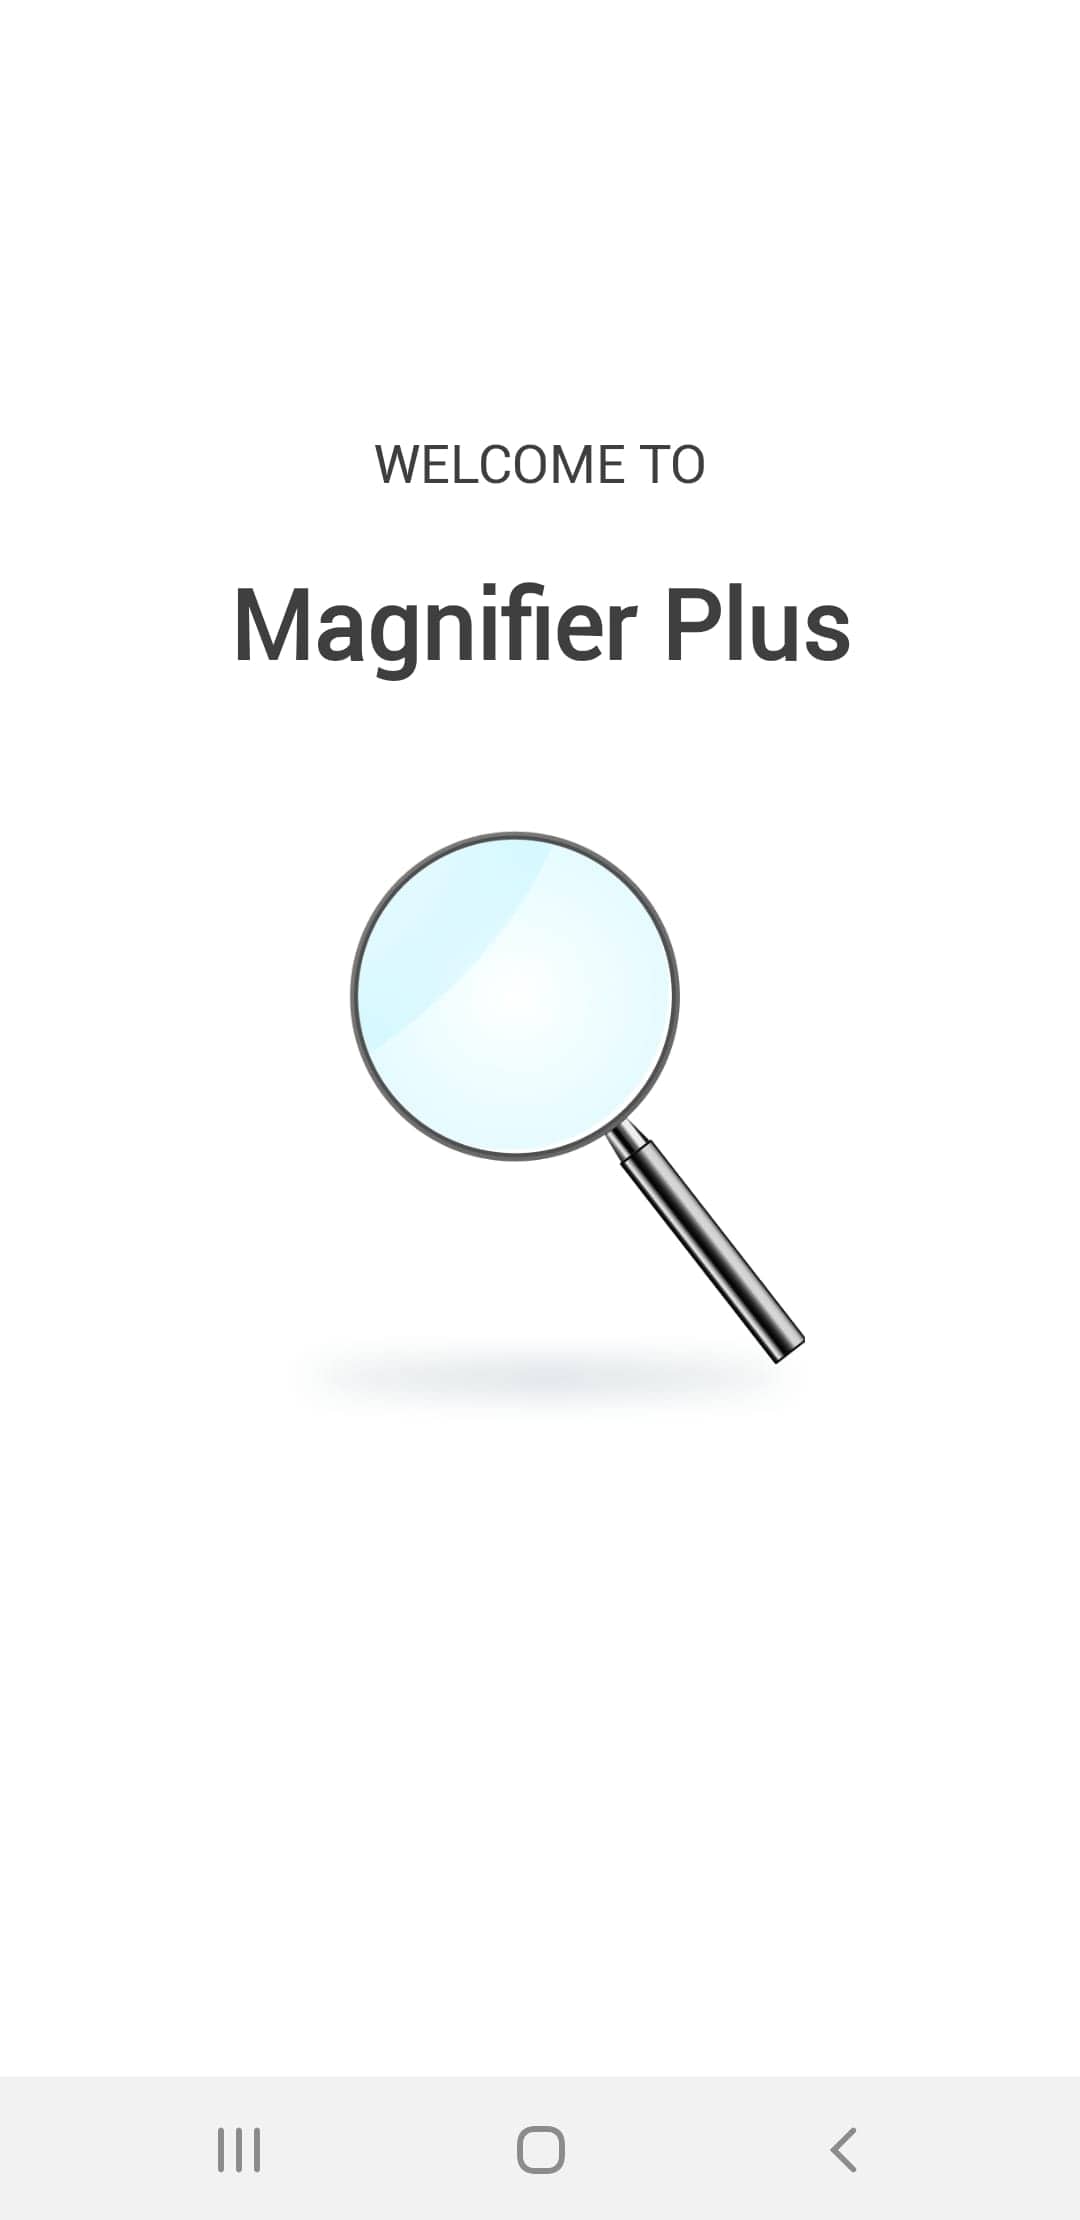 Screenshot From Our Magnifier Plus Review